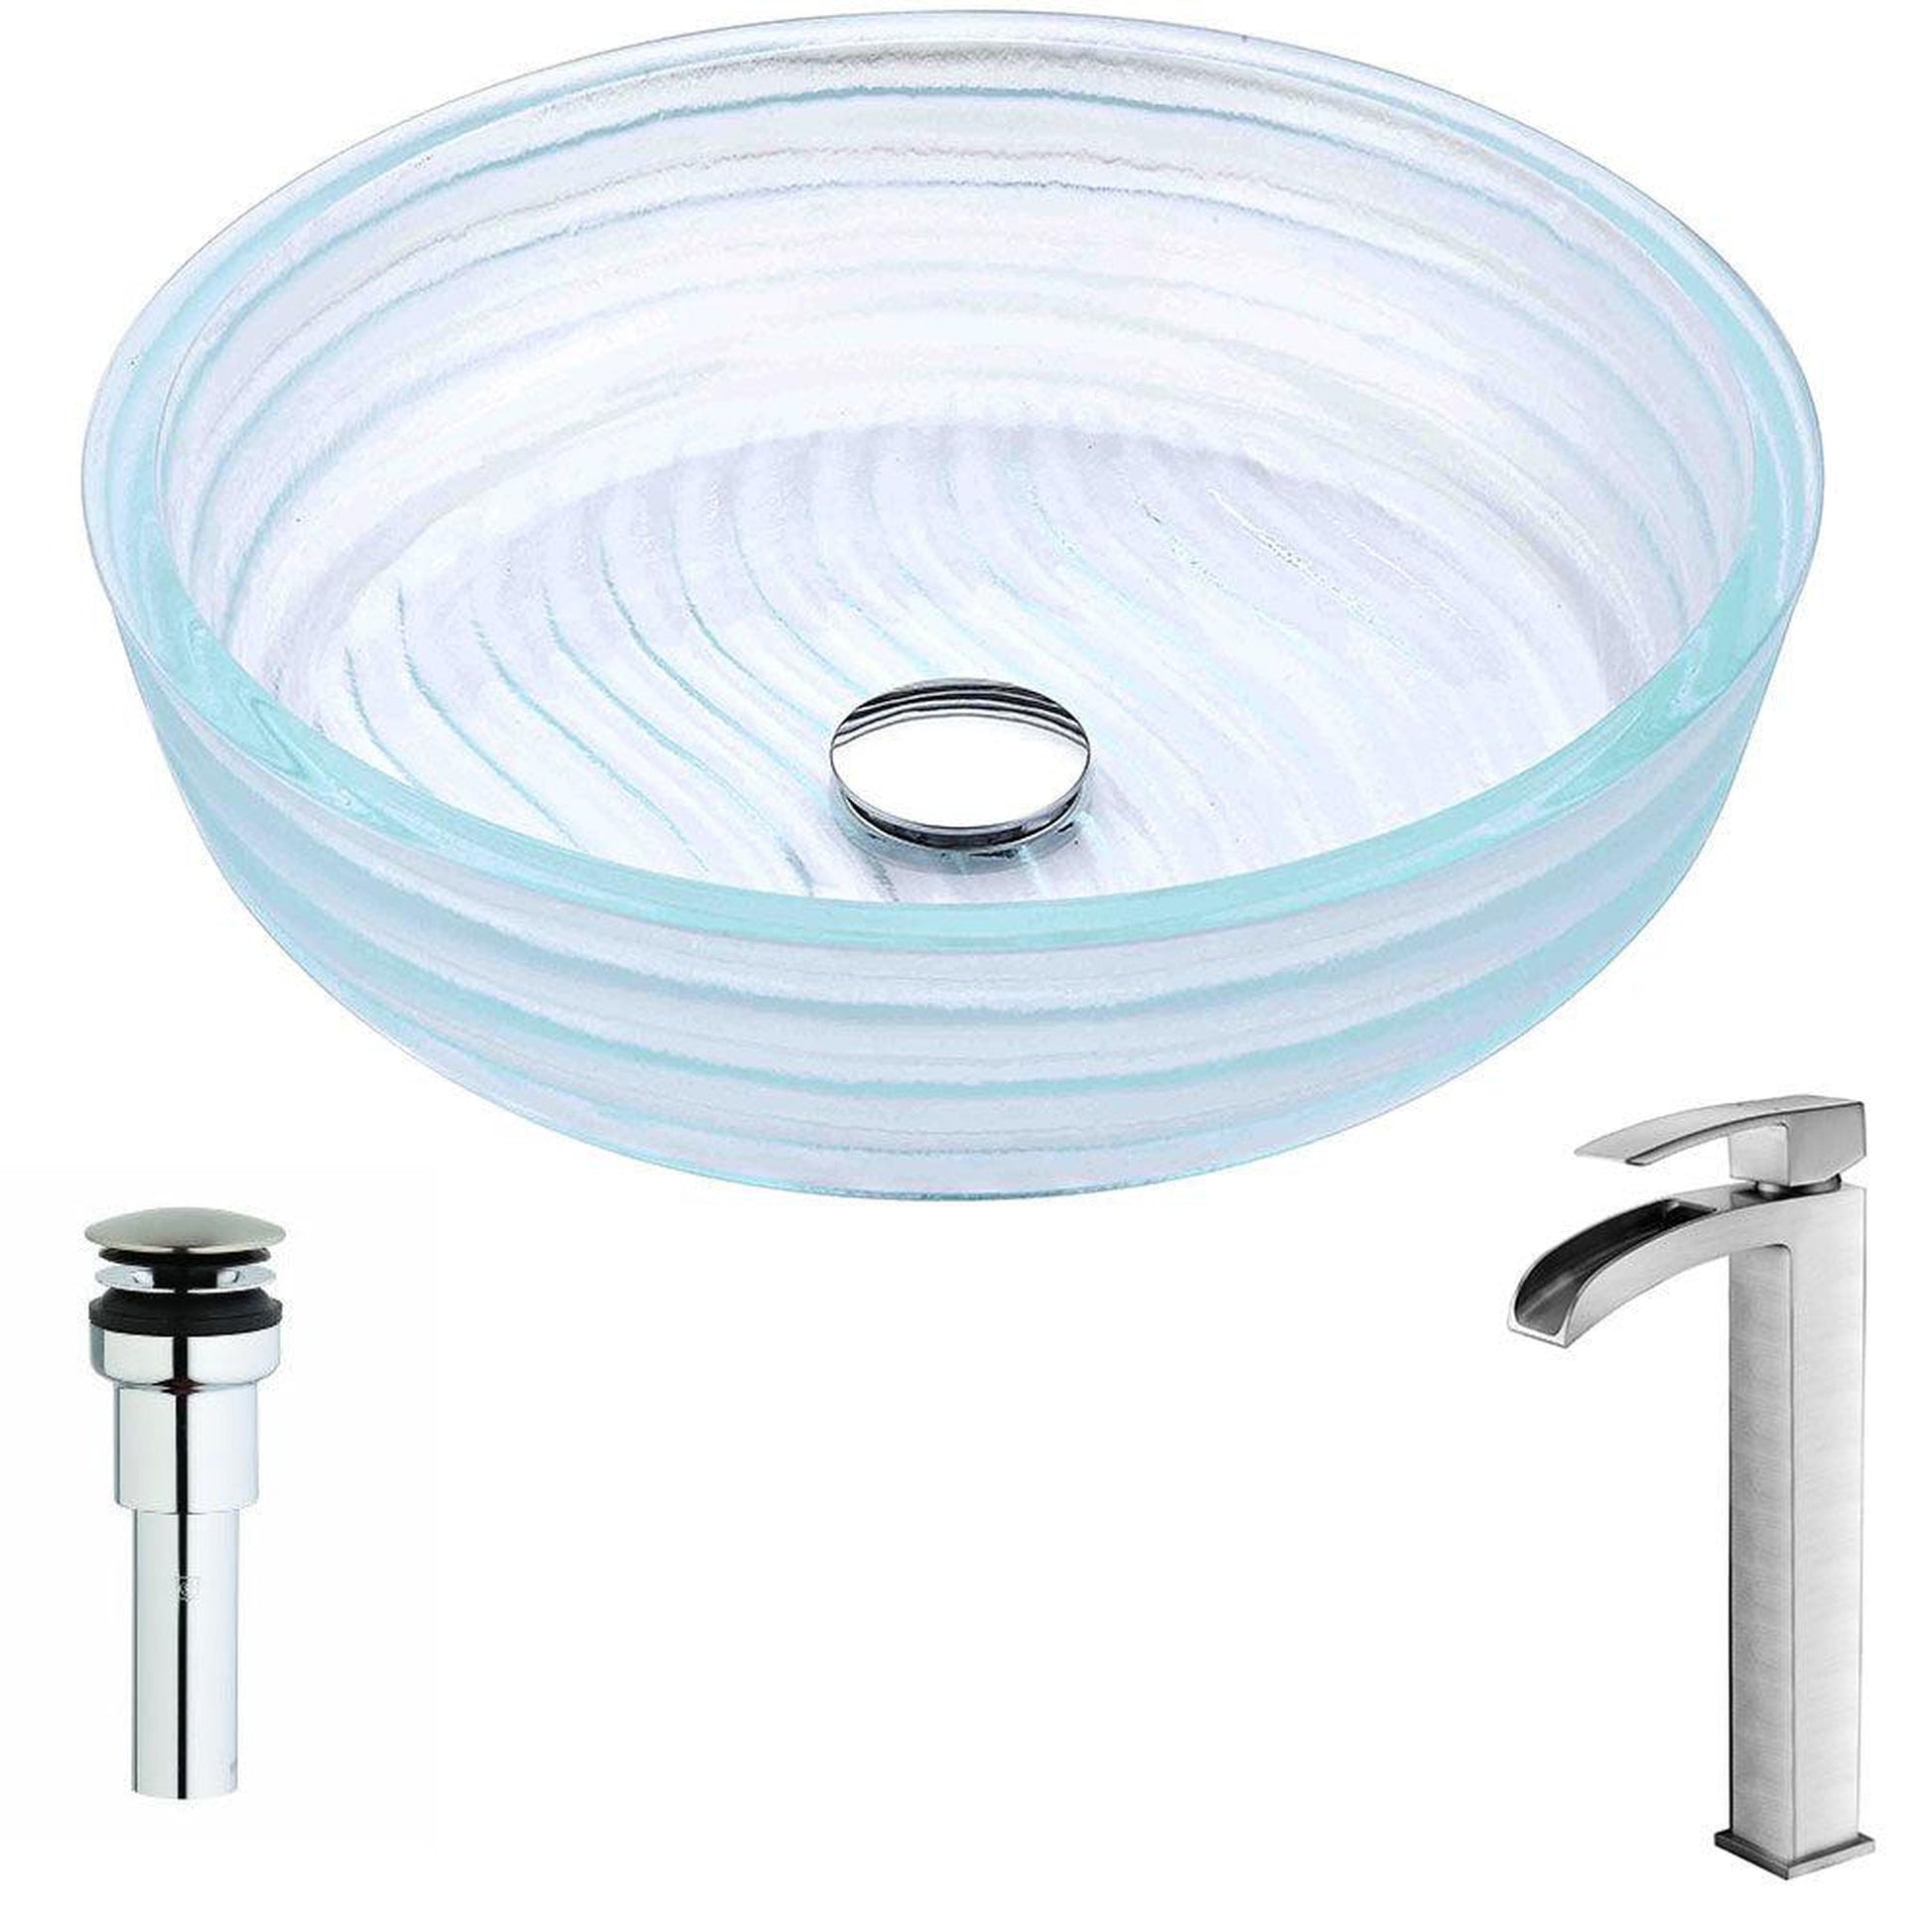 ANZZI Canta Series 17" x 17" Cylinder Shape Translucent Crystal Deco-Glass Vessel Sink With Chrome Pop-Up Drain and Brushed Nickel Key Faucet